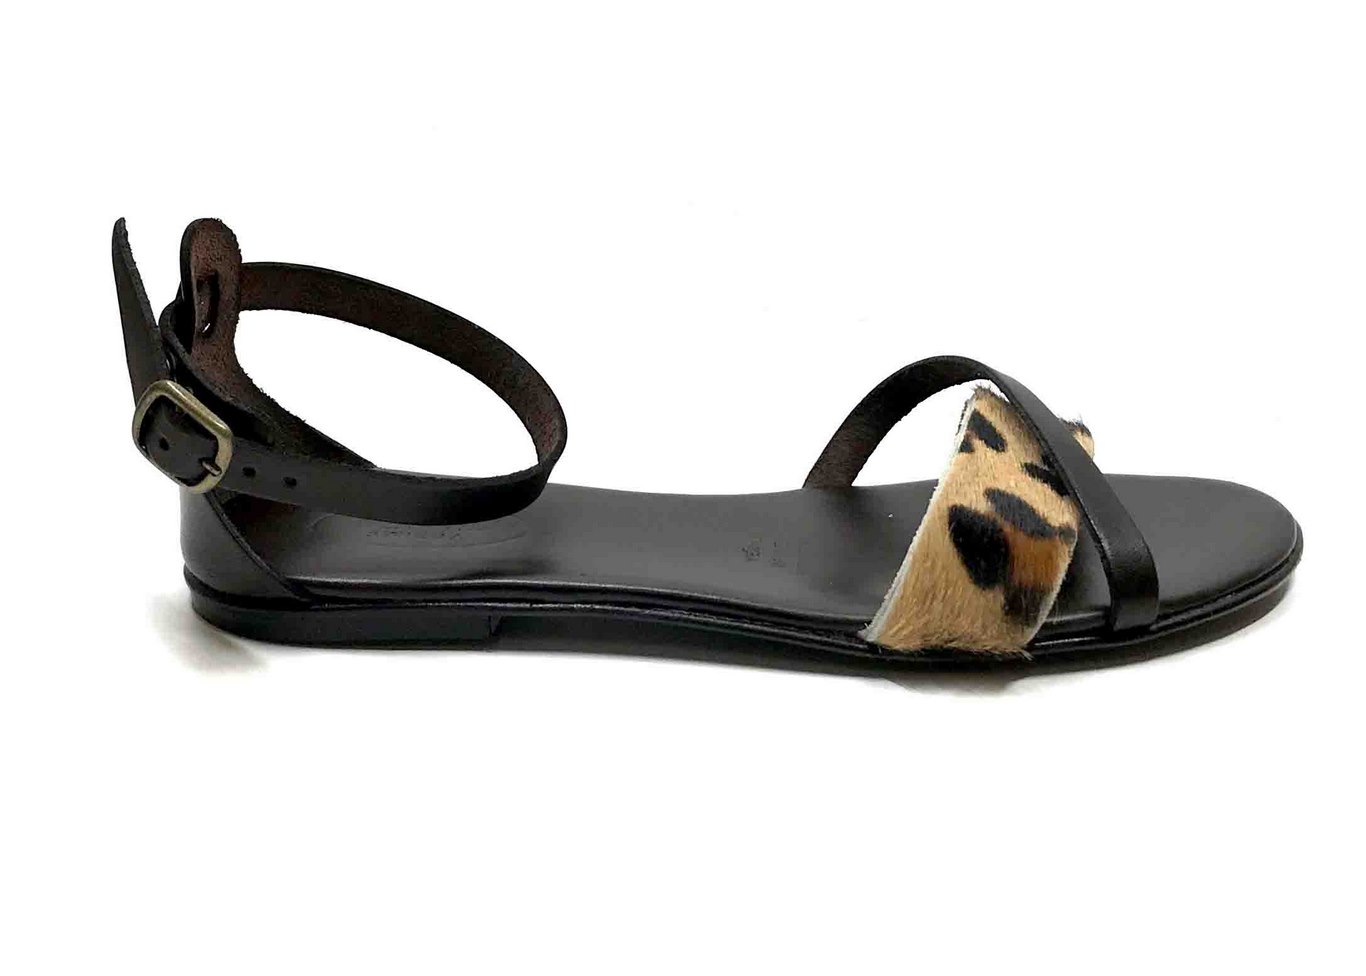 Padded sole Sandals in Brown cowhide leather and leopard print ponyskin-effect